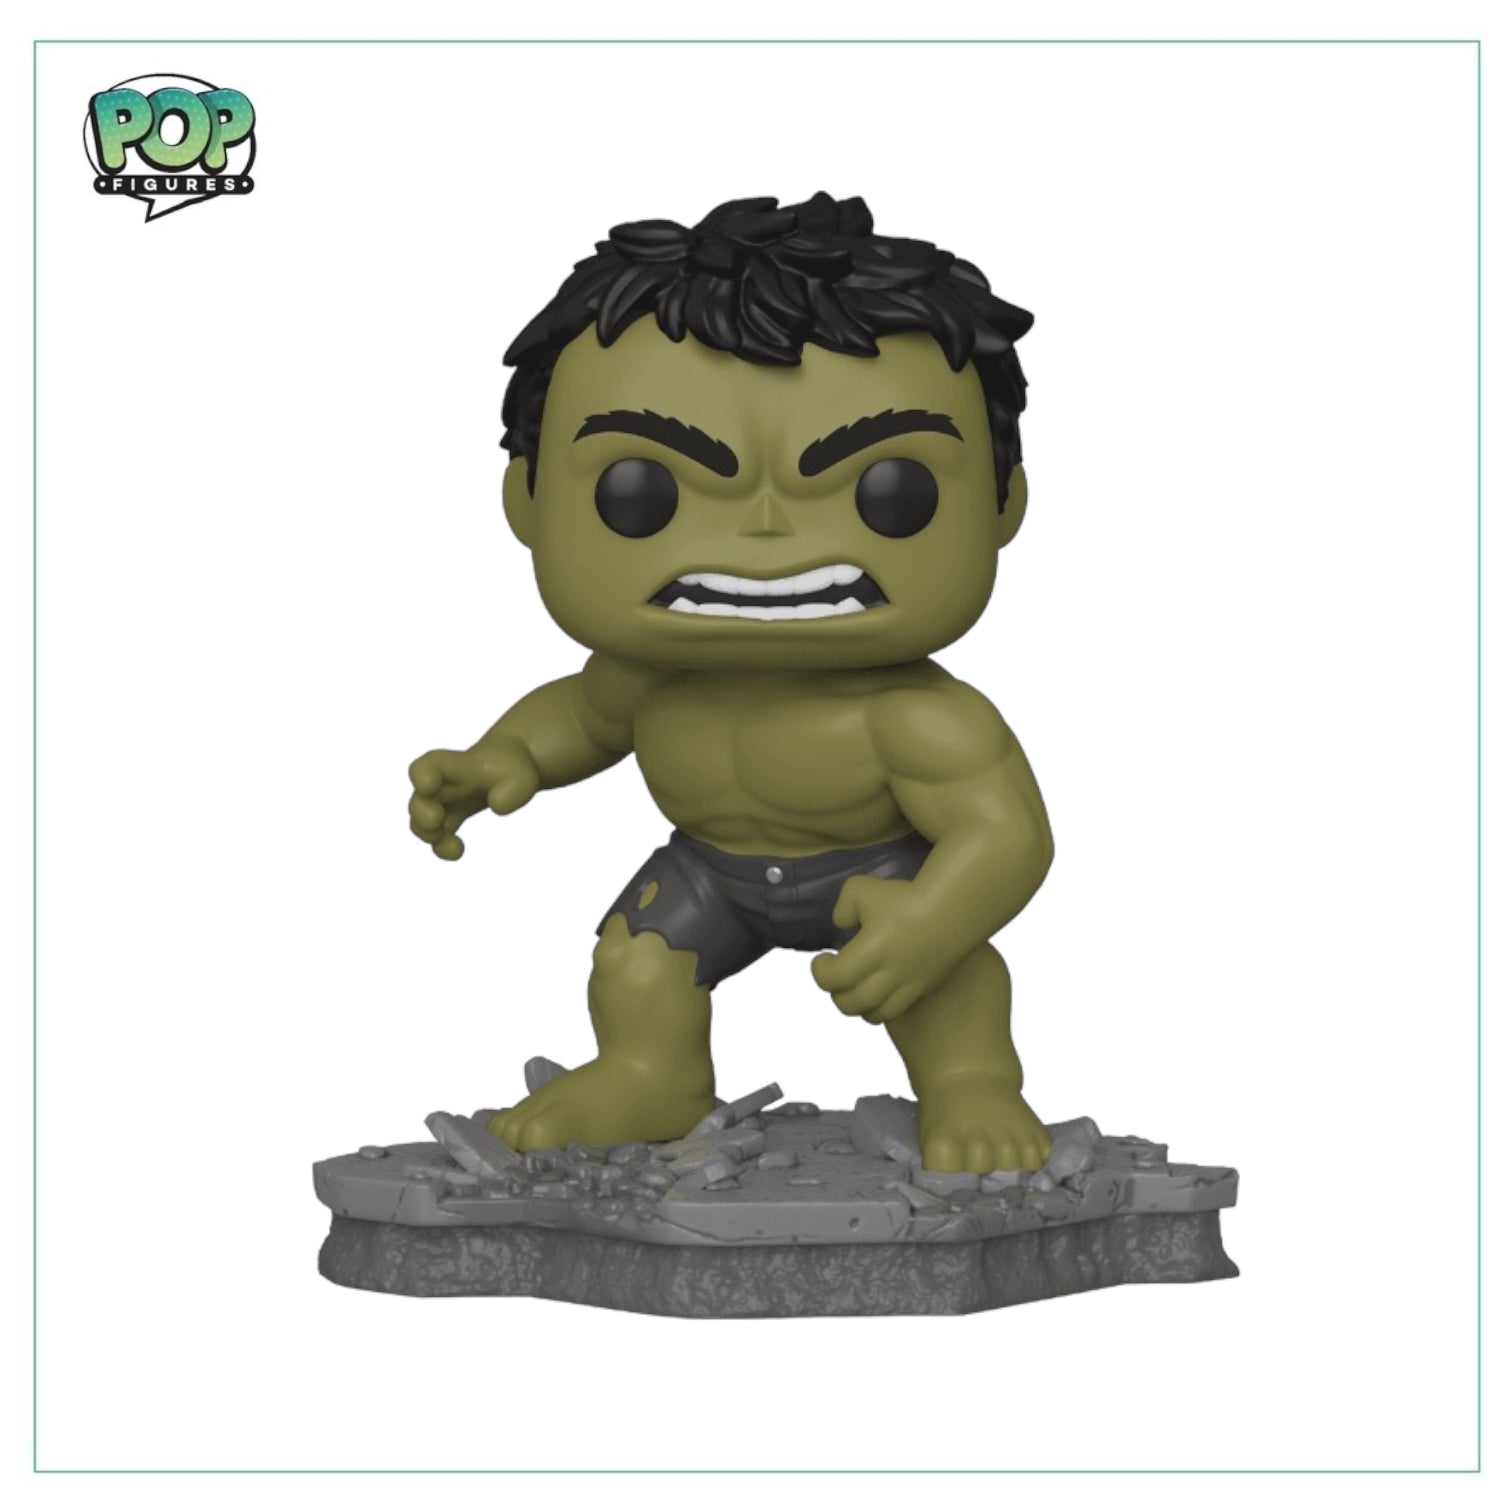 Hulk #585 Funko Deluxe Pop! - Avengers Assemble - Special Edition